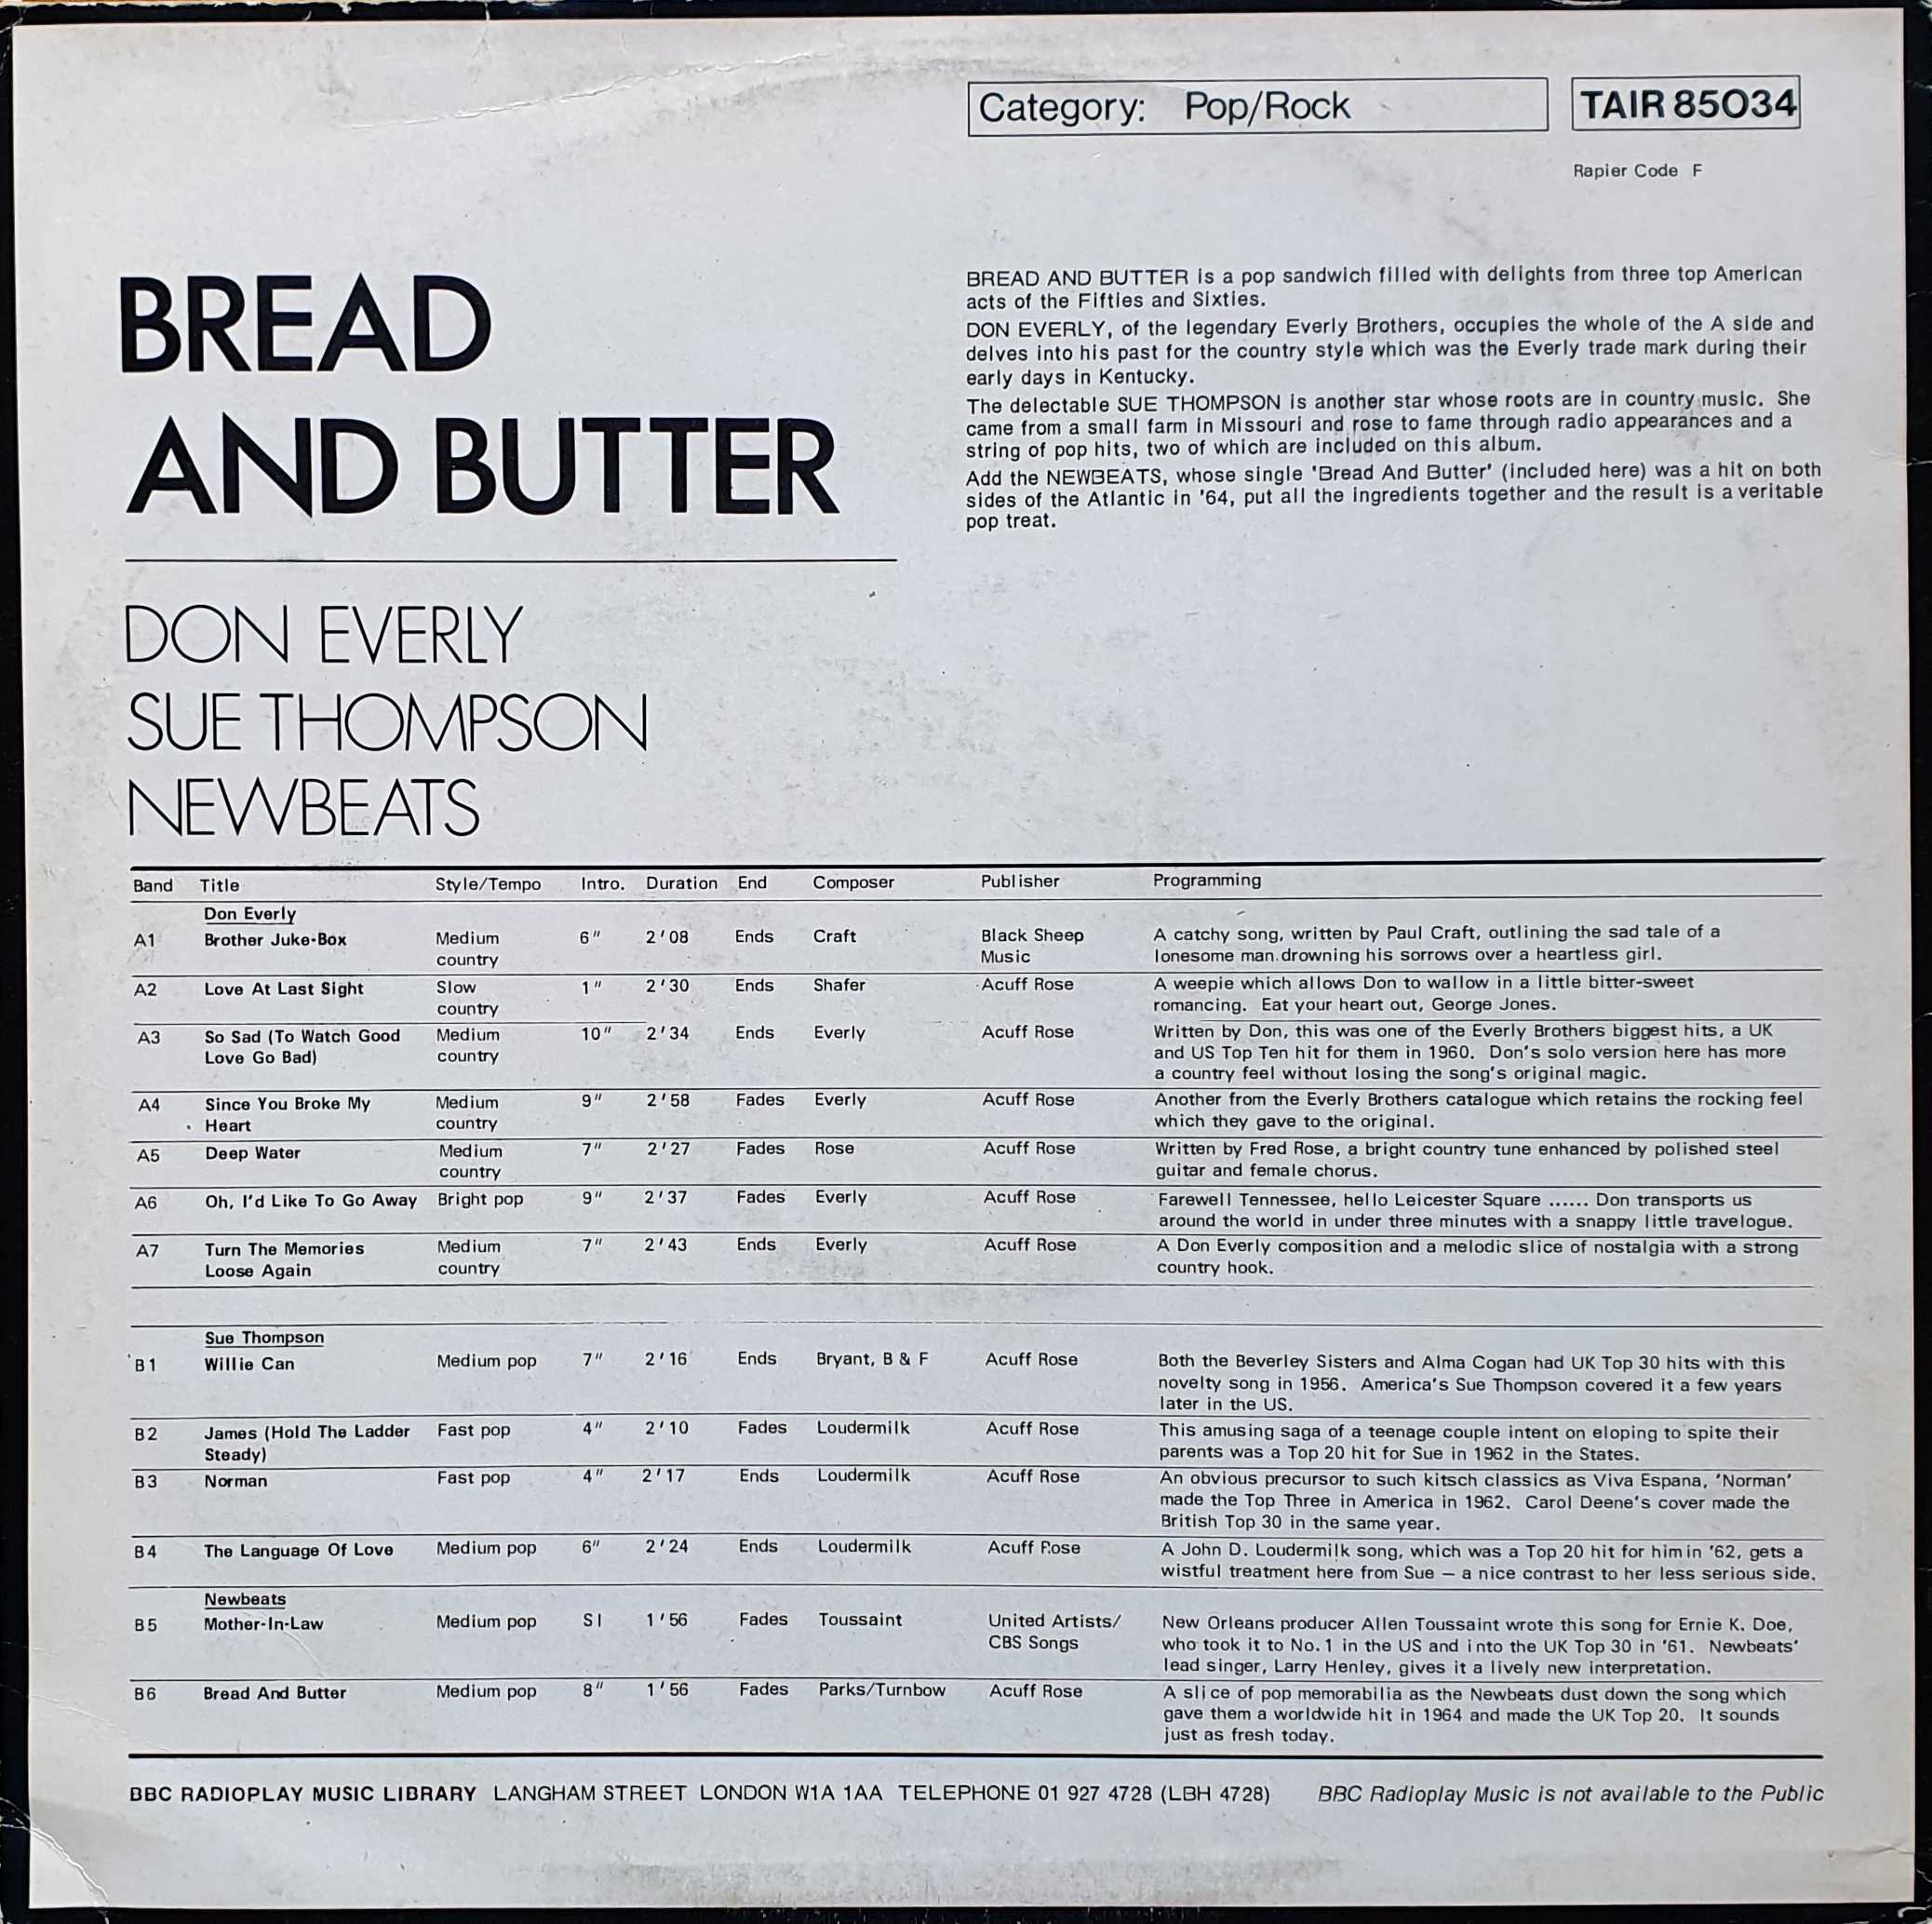 Picture of TAIR 85034 Bread and butter by artist Don Everly / Sue Thompson from the BBC records and Tapes library